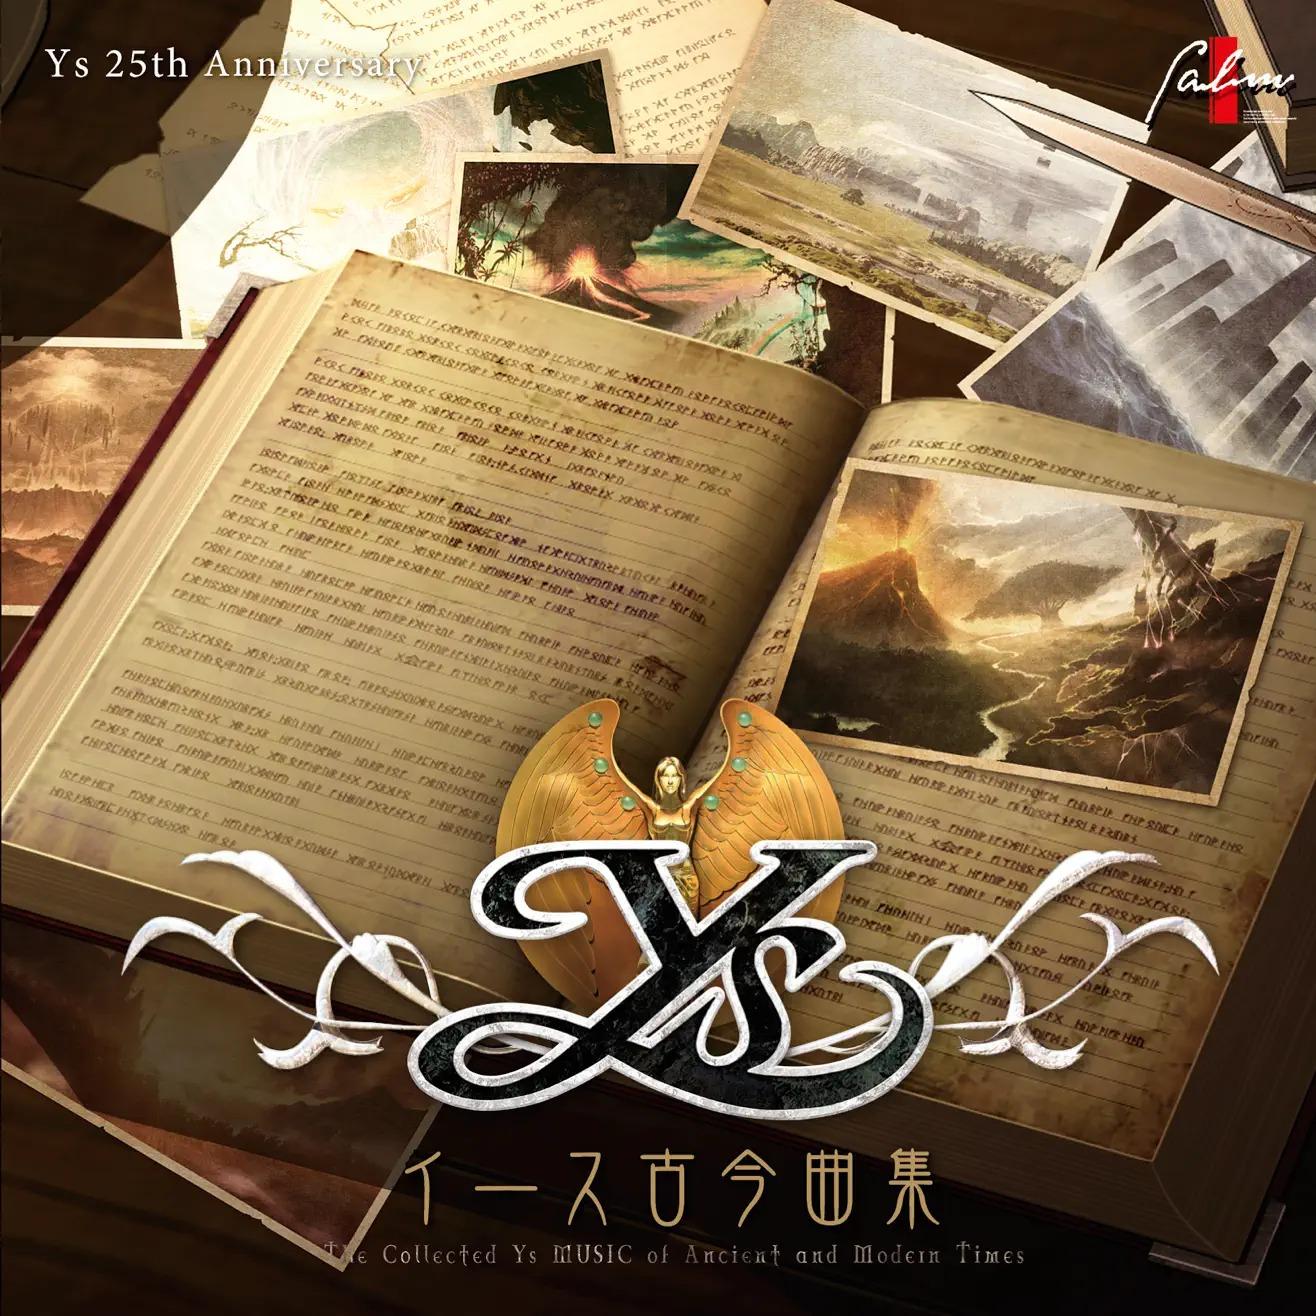 The Collected Ys MUSIC of Ancient and Modern Times